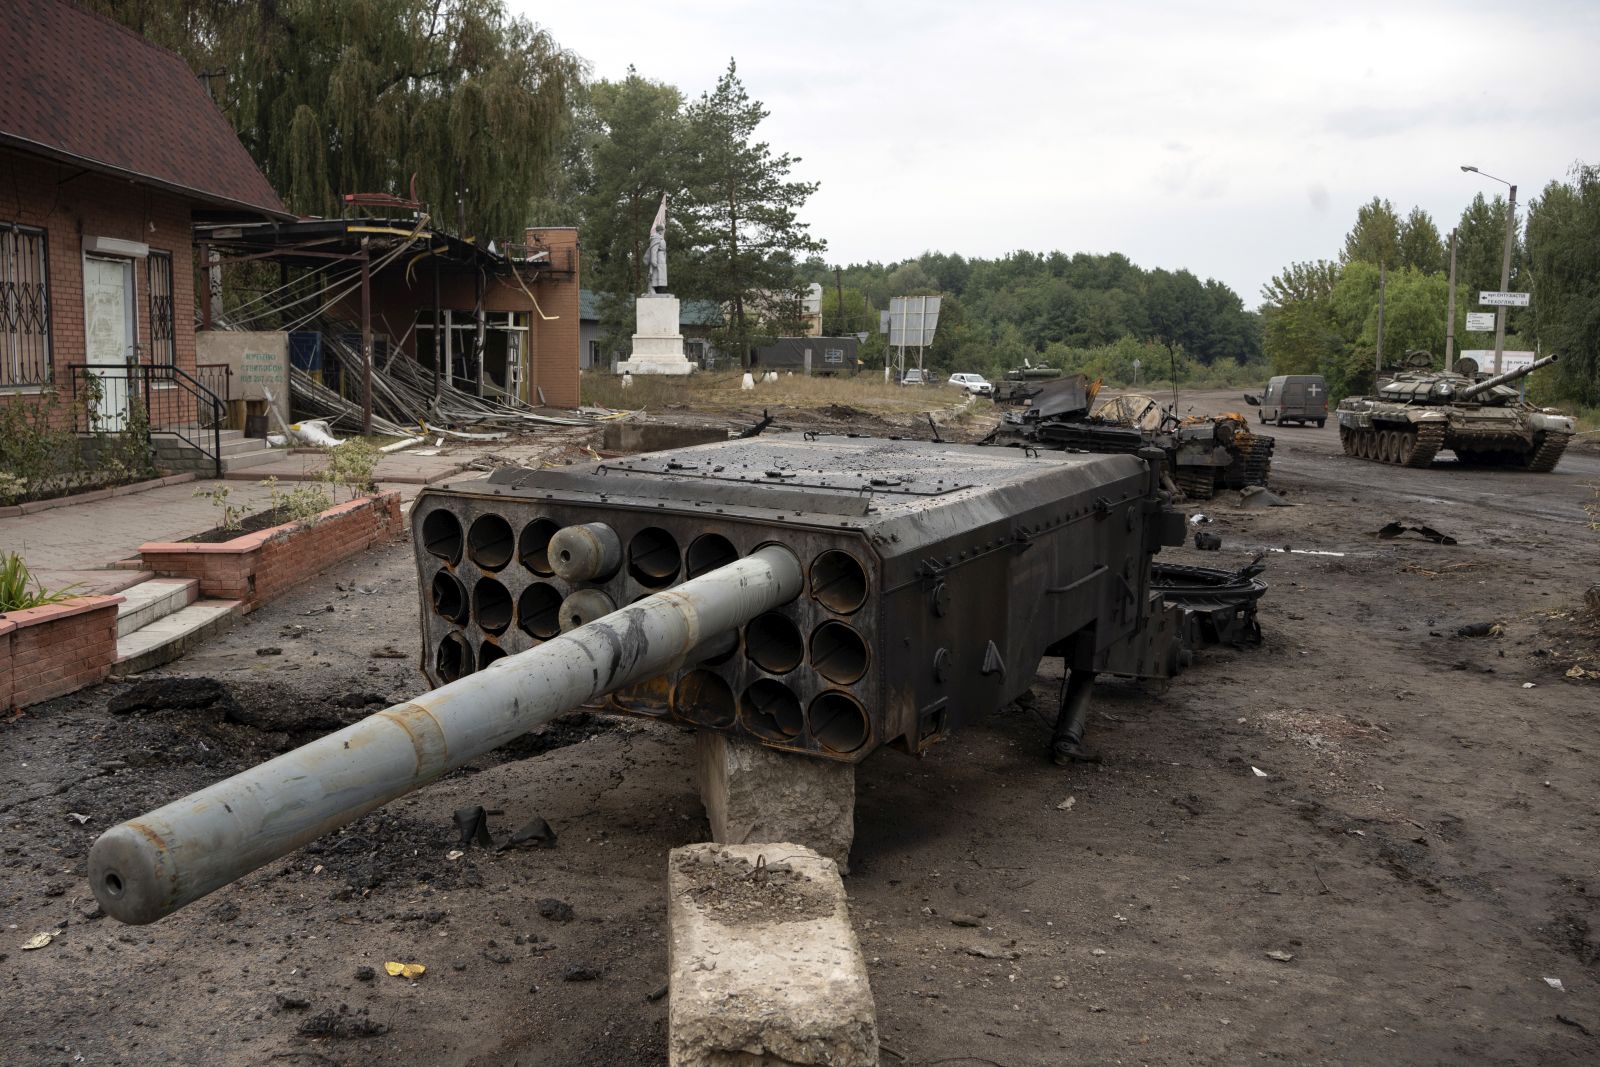 epa10186107 A destroyed Grad rocket launcher on a street in the reclaimed city of Izyum, Ukraine, 15 September 2022. The Ukrainian army pushed Russian troops from occupied territory in the northeast of the country in a counterattack. Kharkiv and surrounding areas have been the target of heavy shelling since February 2022, when Russian troops entered Ukraine starting a conflict that has provoked destruction and a humanitarian crisis.  EPA/ANASTASIA VLASOVA